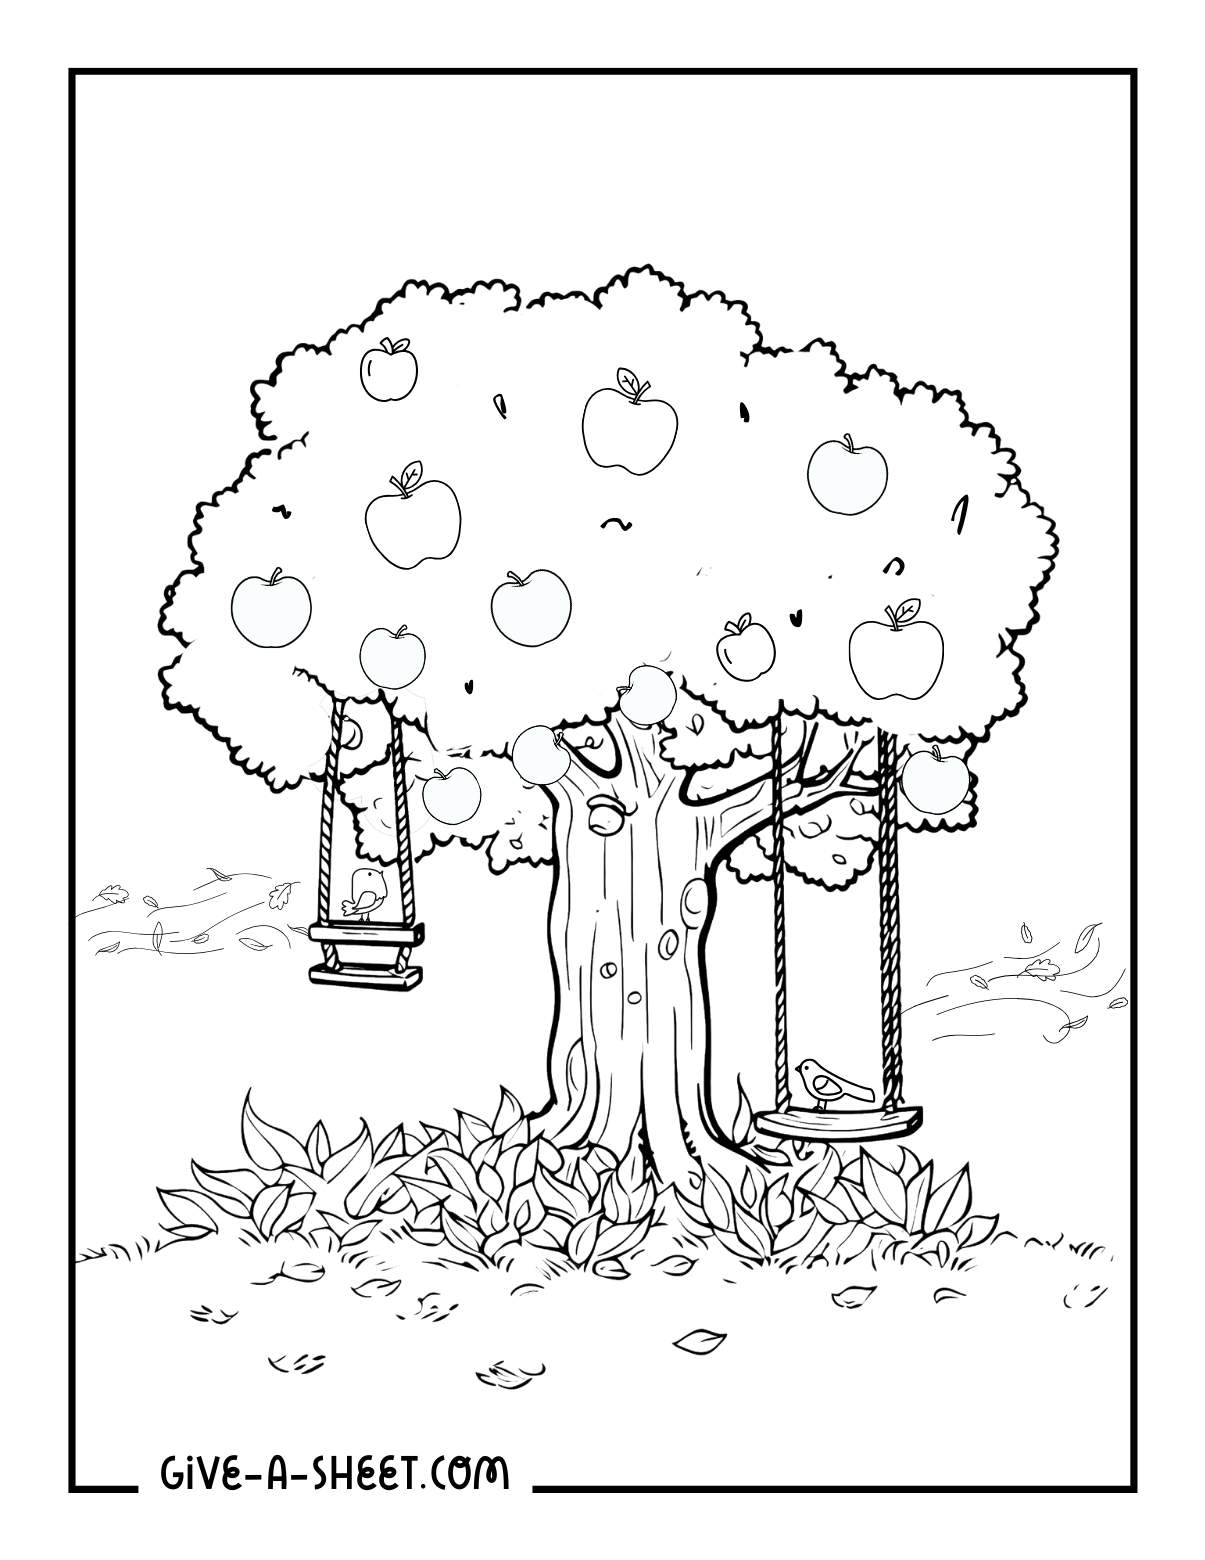 Birds on a swing on an apple tree coloring page.